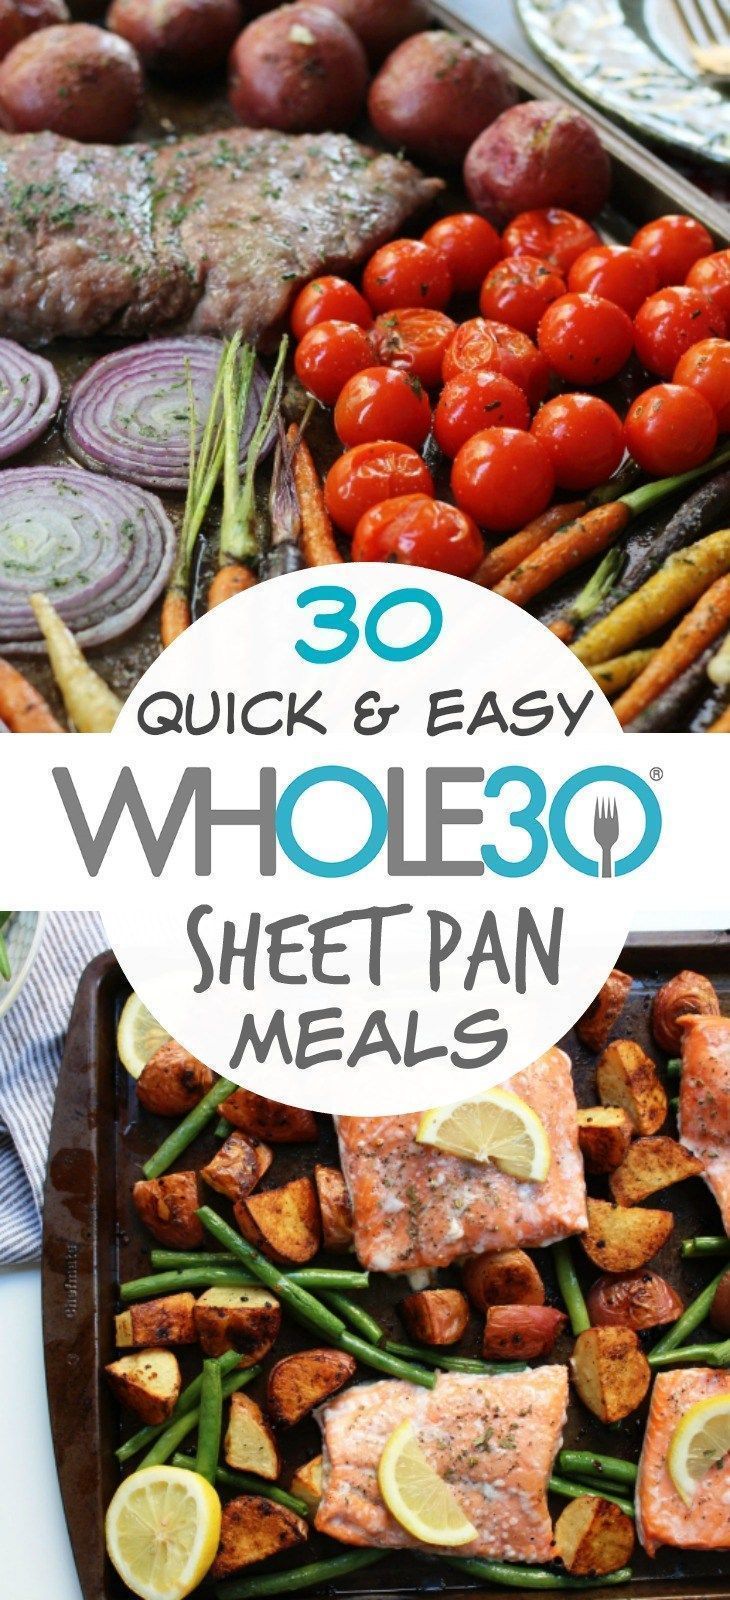 30 Whole30 Sheet Pan Recipes: The Best Quick and Easy One Pan Meals -   13 healthy recipes For One easy
 ideas